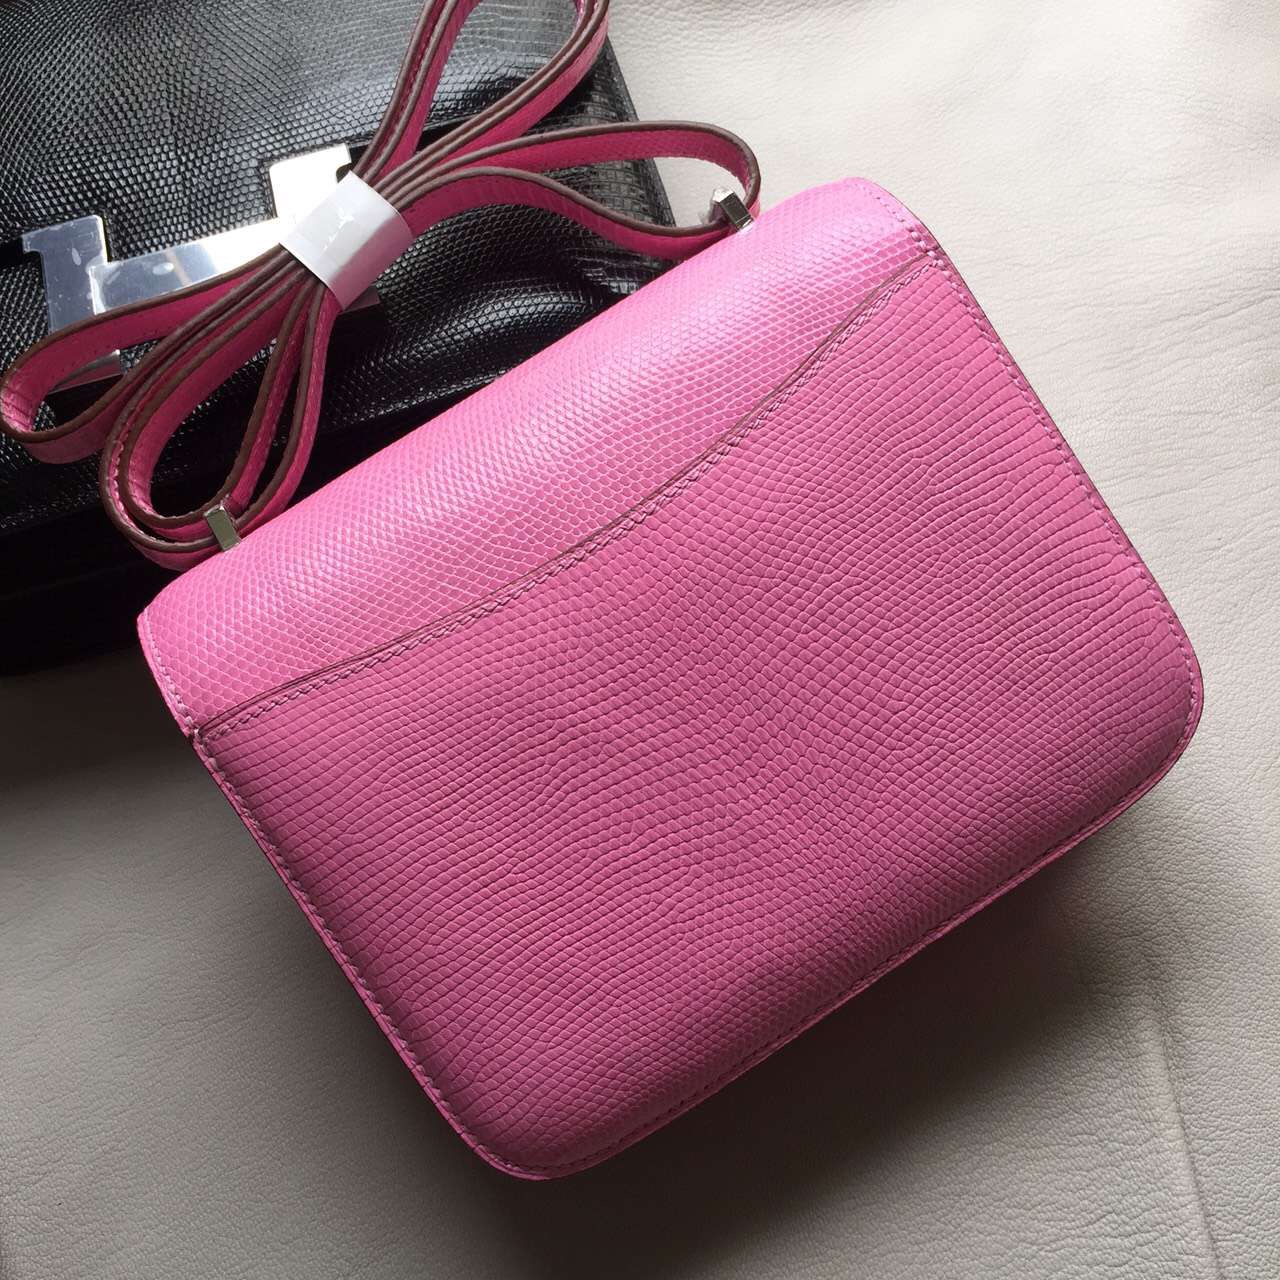 Fashion Women&#8217;s Bag Hermes Constance24cm in 5P Pink Lizard Leather